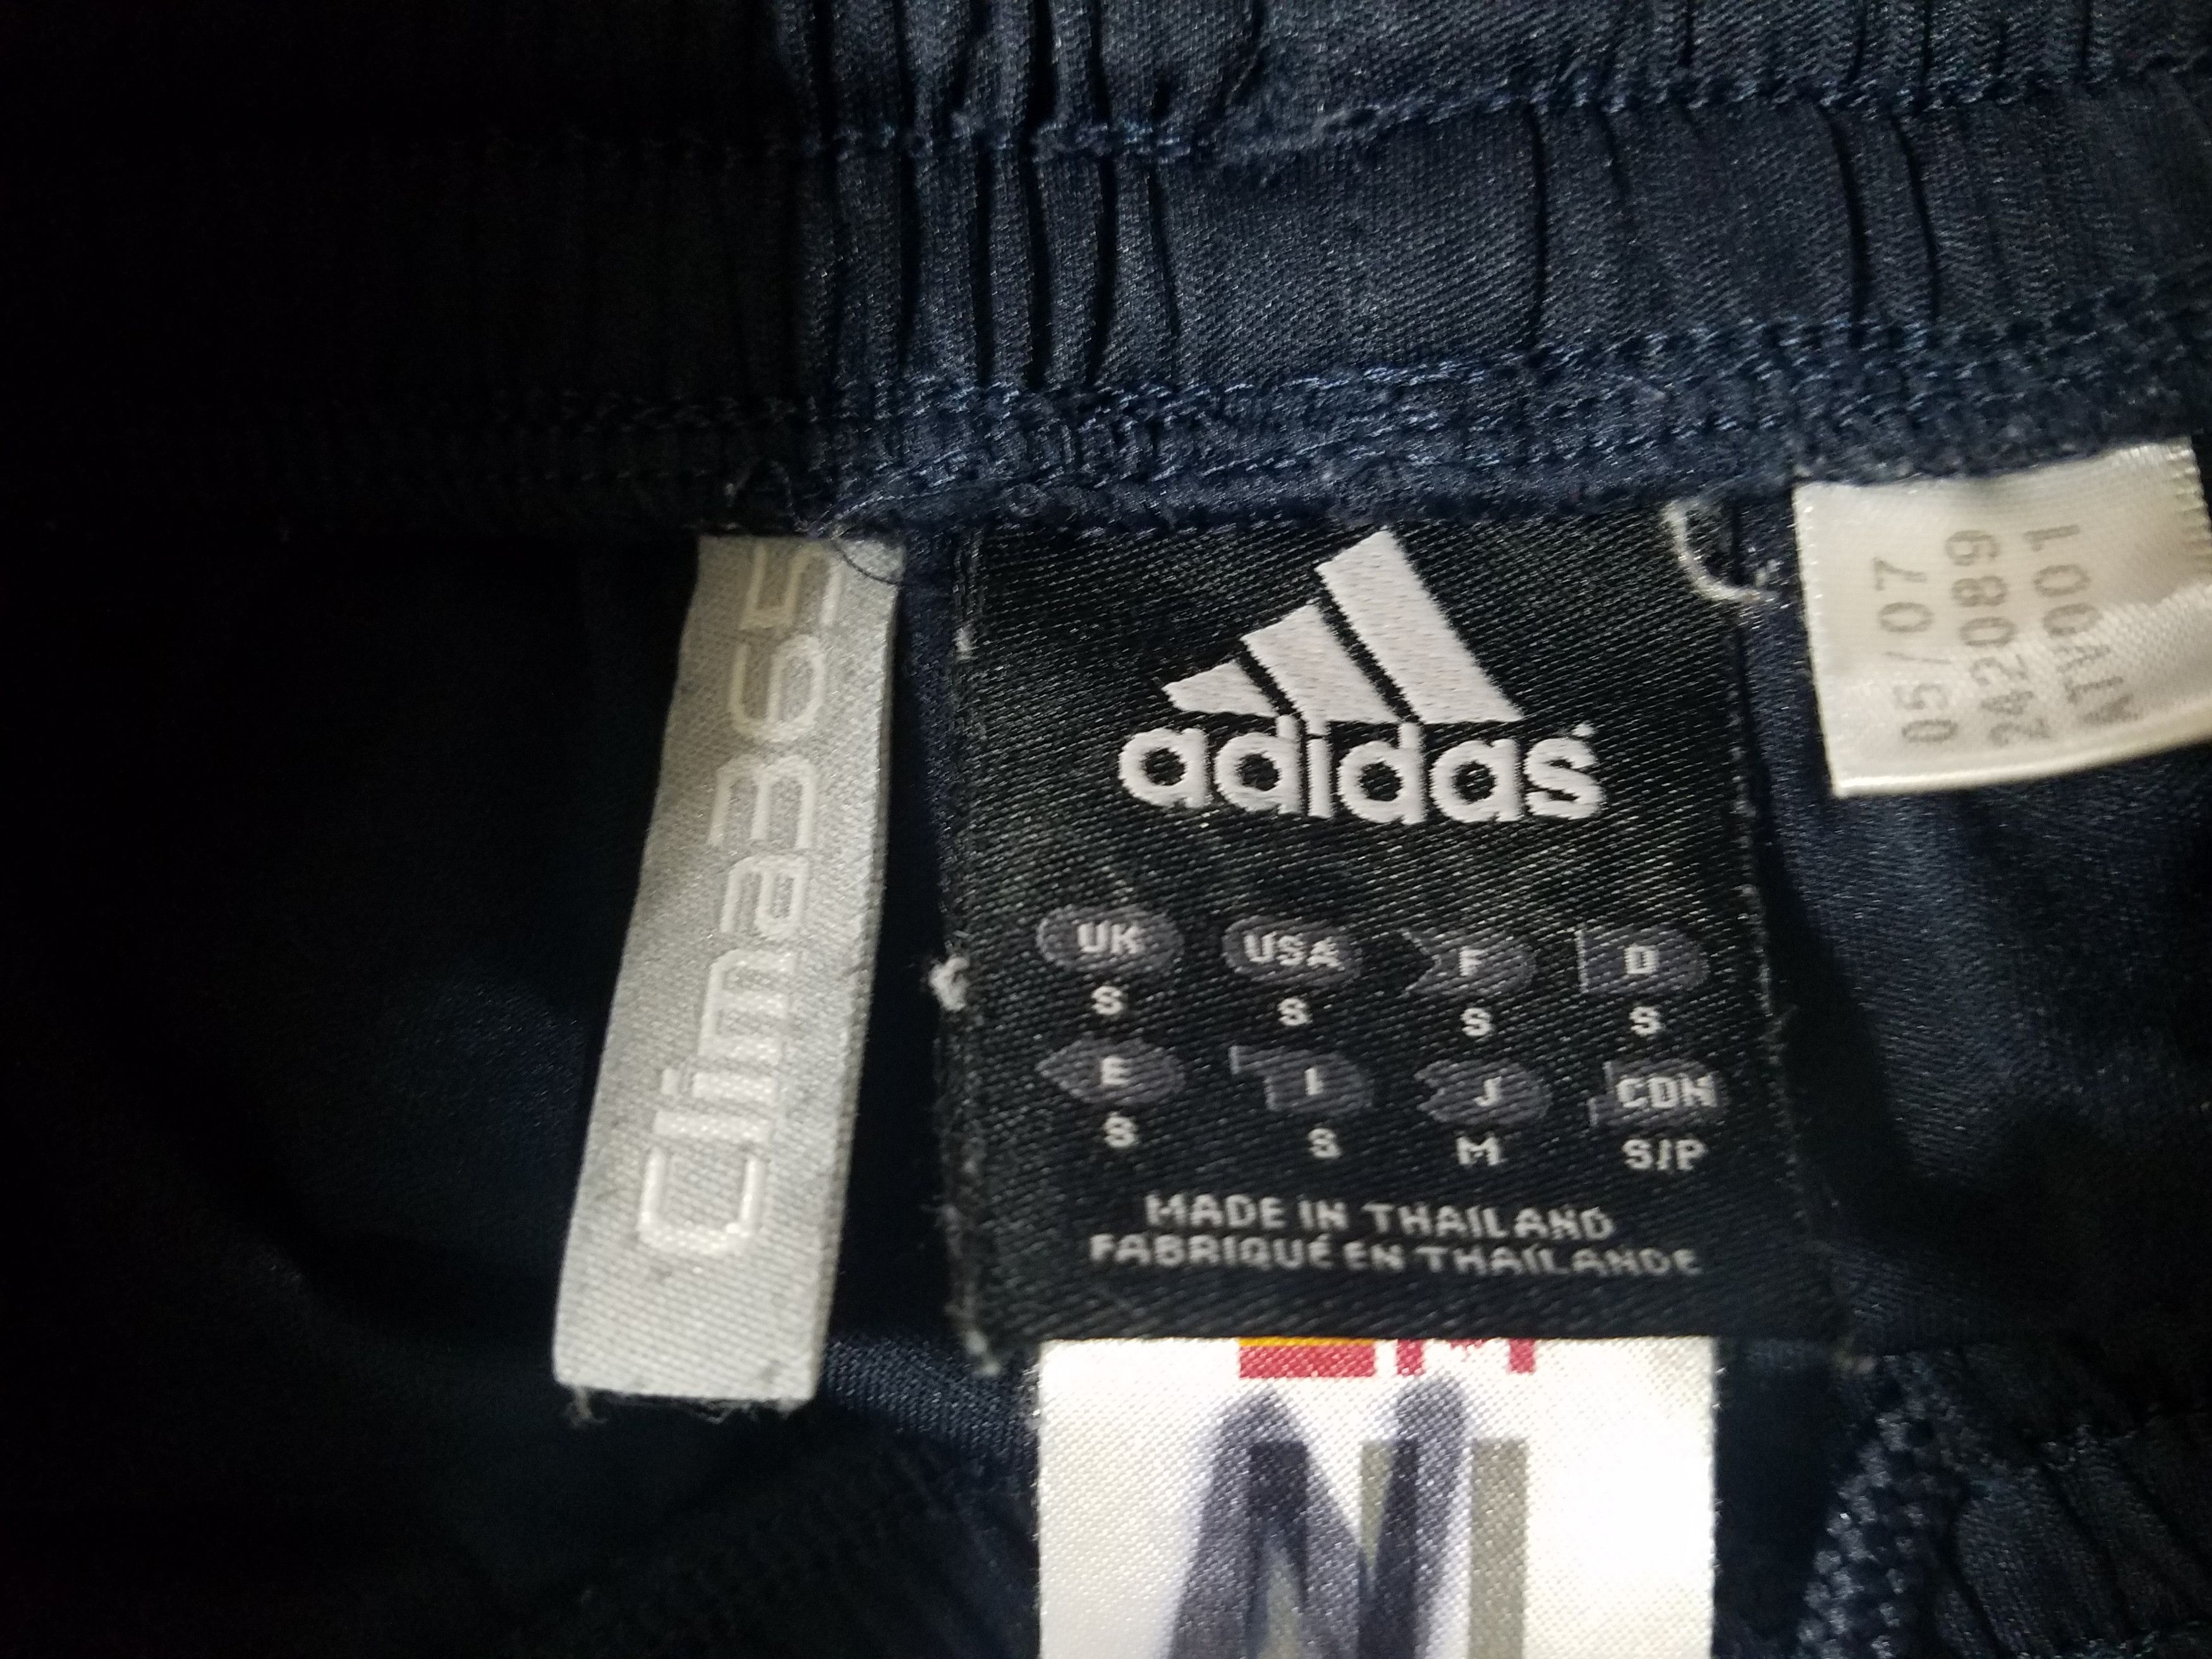 Adidas Adidas Men's Small Navy Blue Athletic Pants Joggers Track Size US 30 / EU 46 - 4 Preview